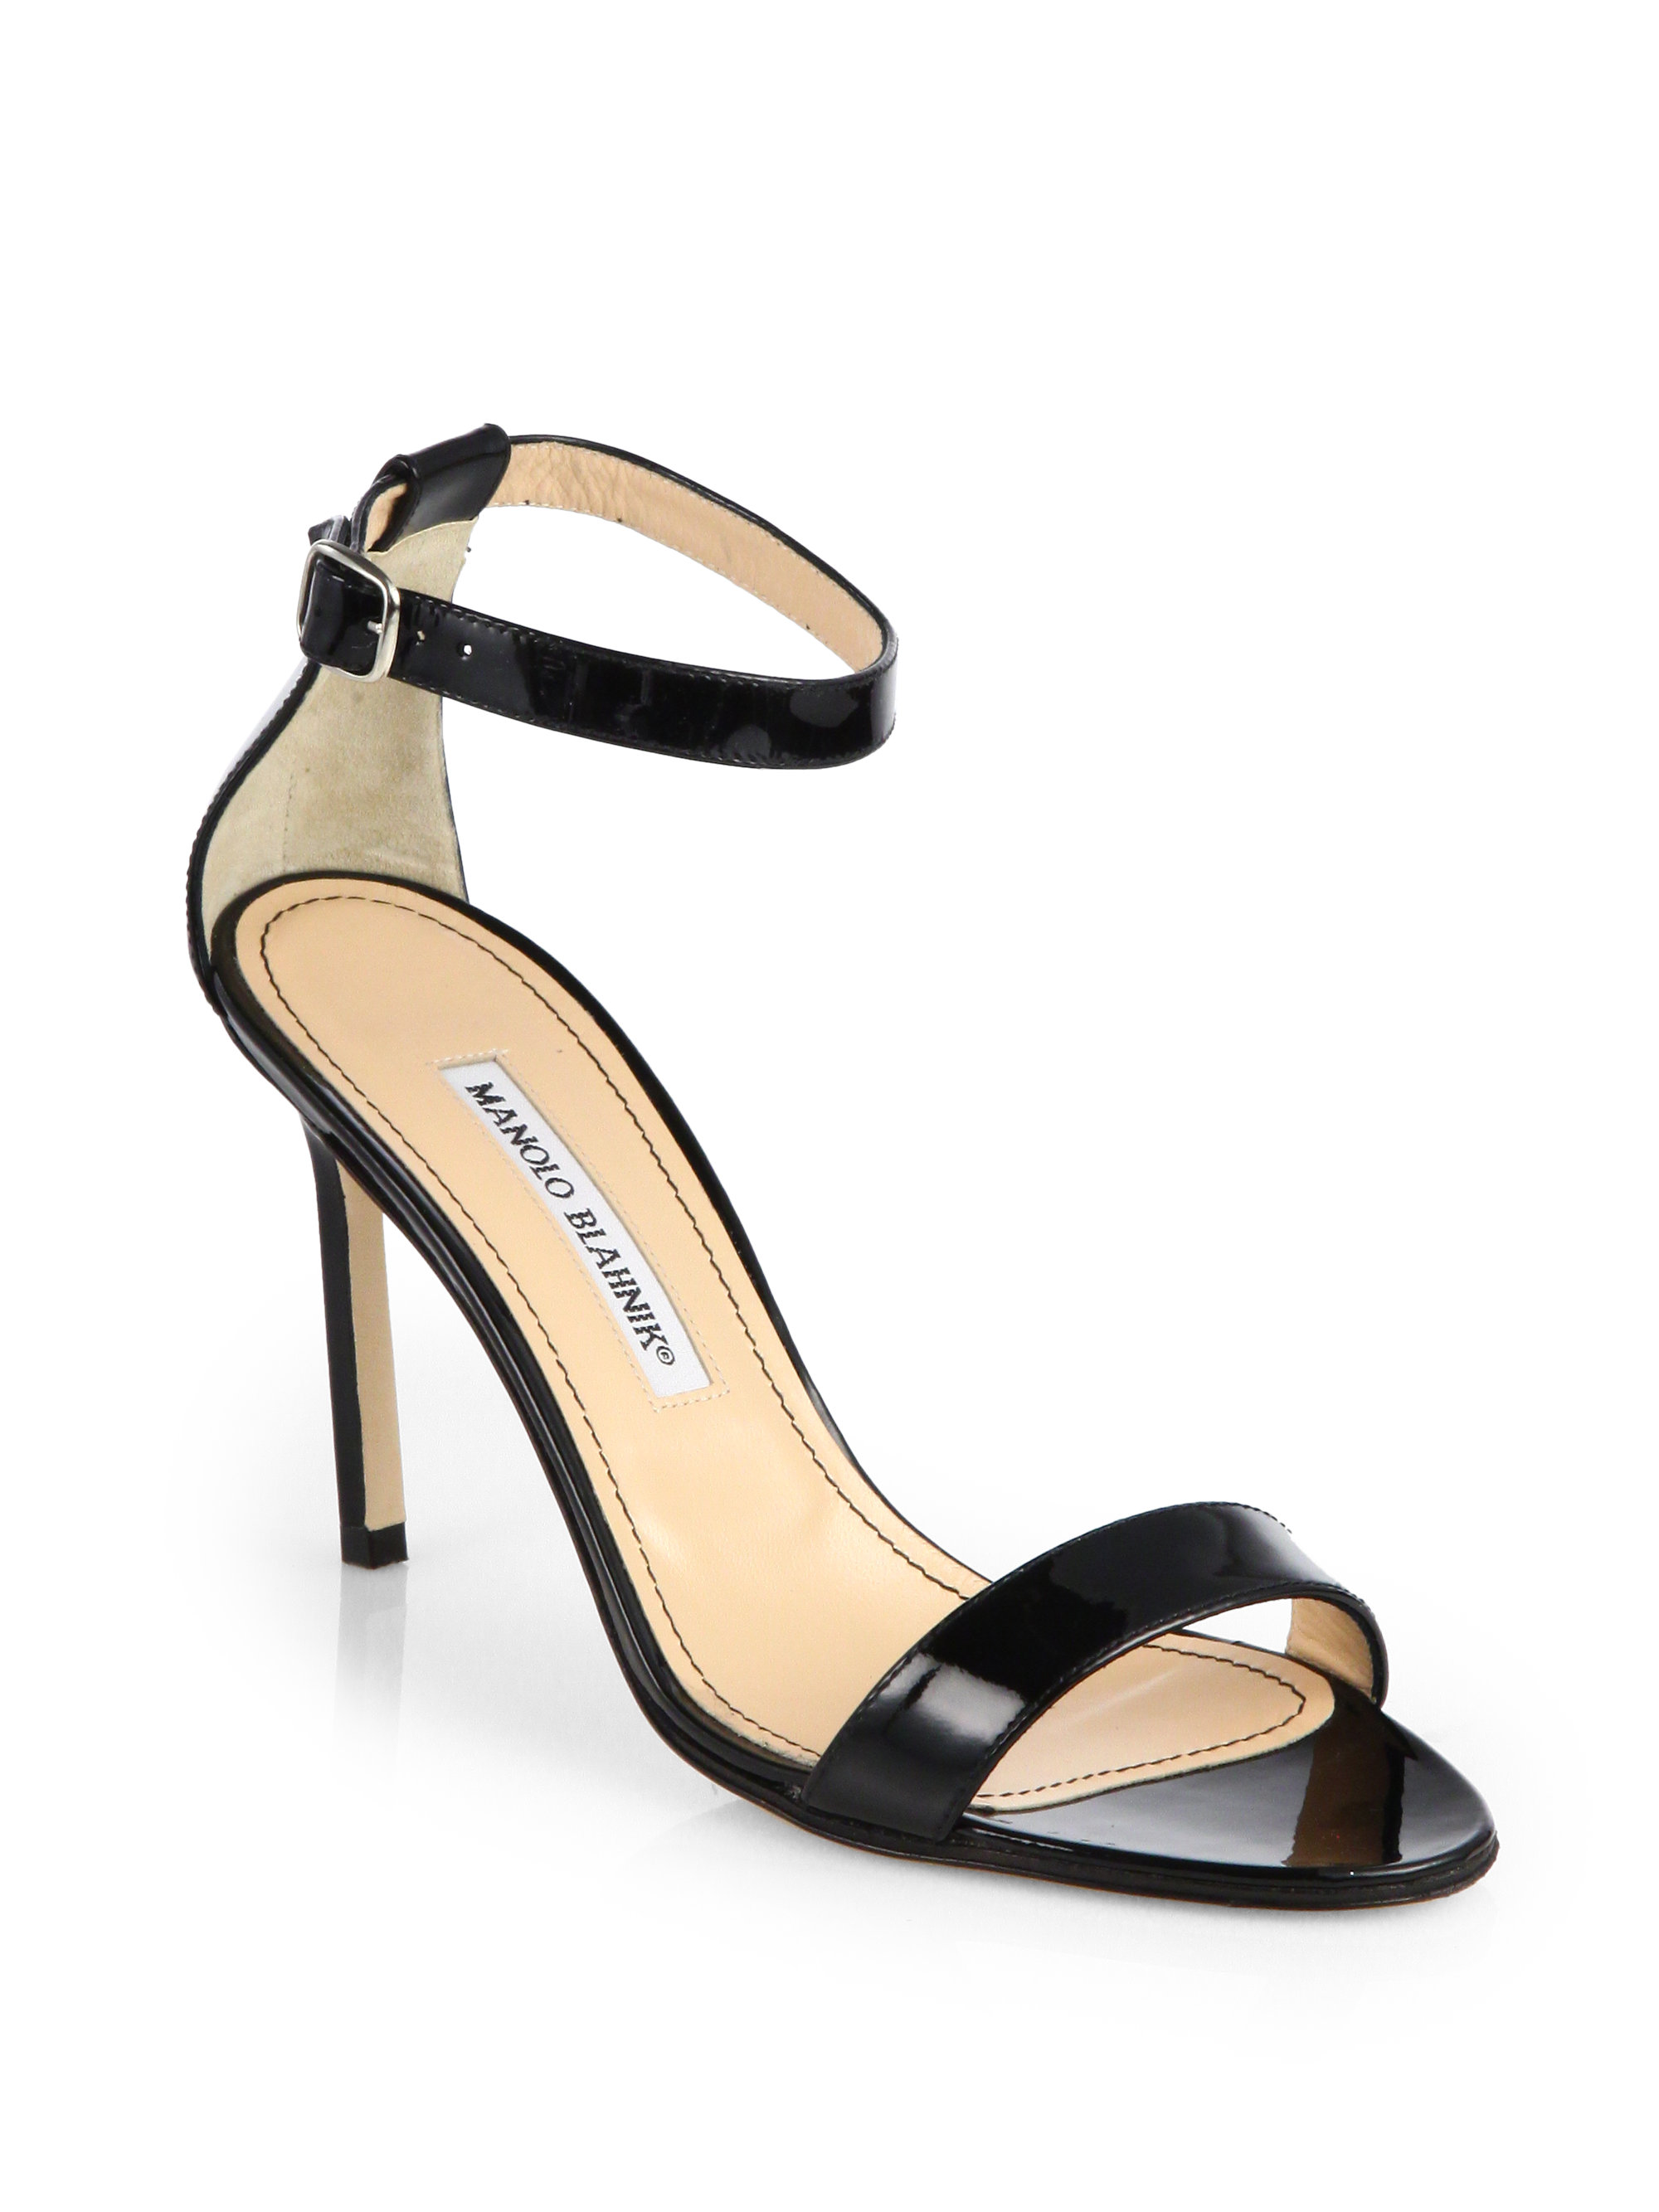 Manolo blahnik Chaos Patent Leather Ankle Strap Sandals in Brown | Lyst